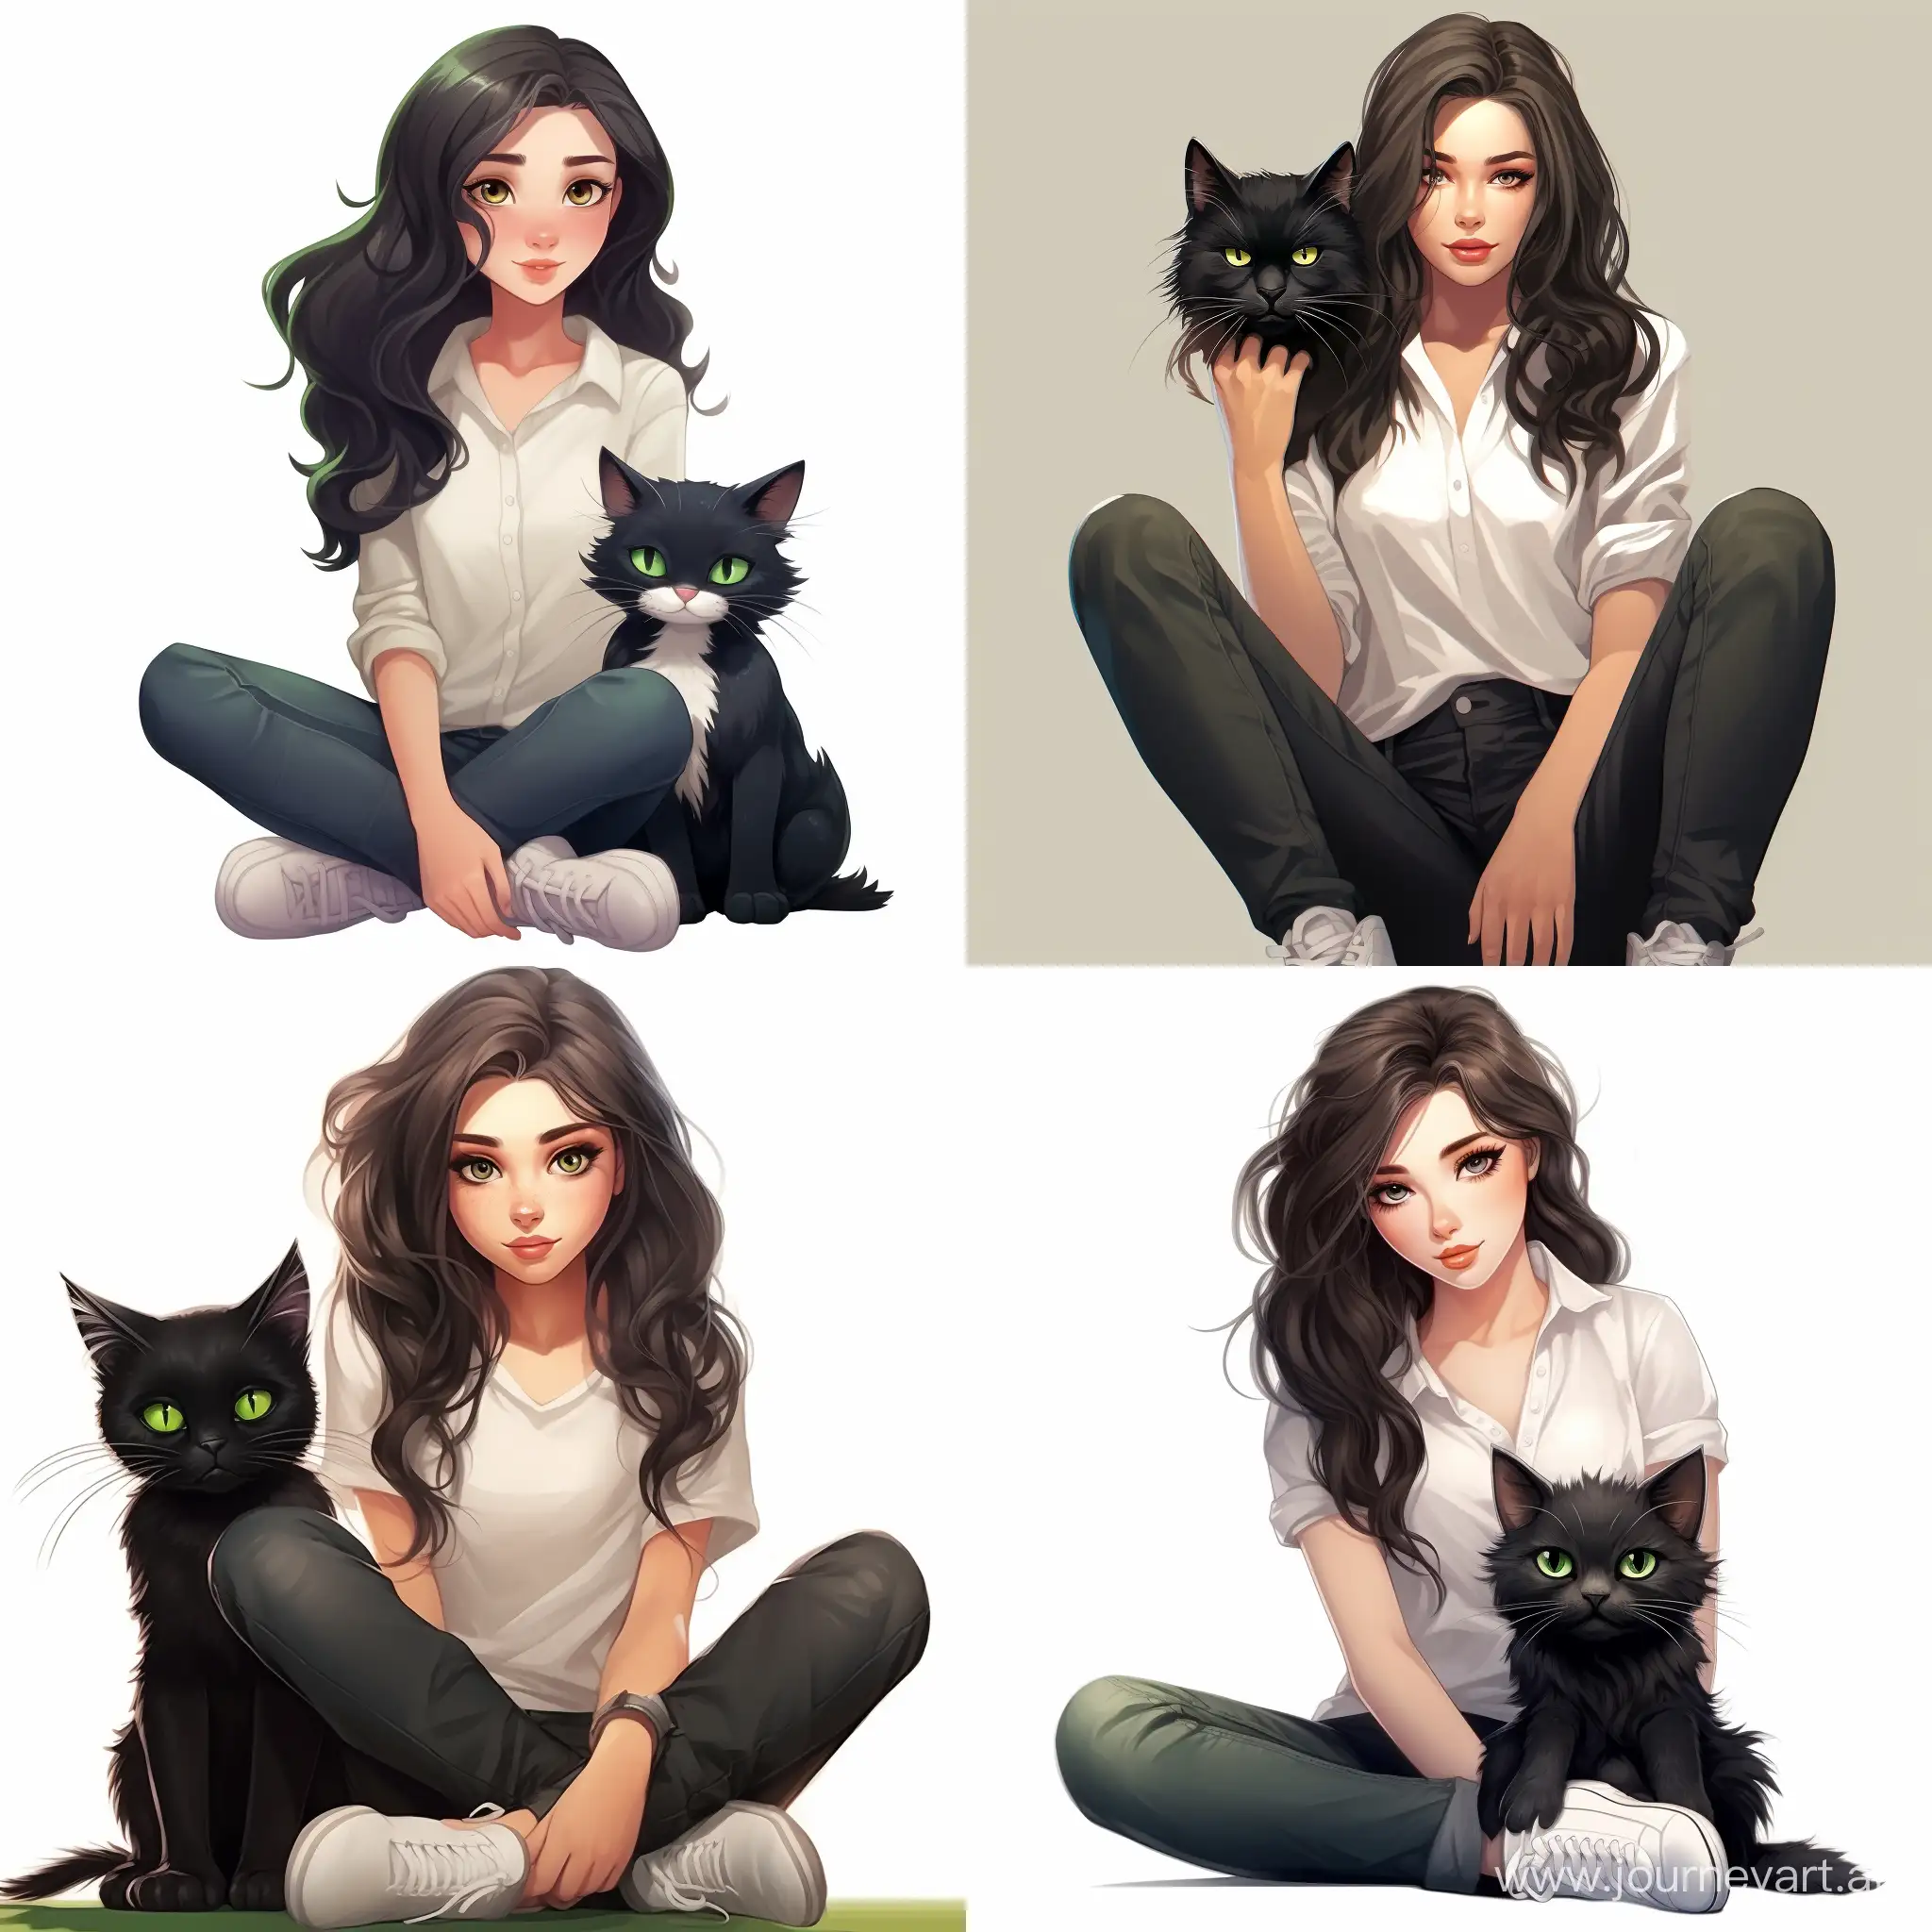 Expressive-Teenage-Girl-with-Black-Cat-in-HighQuality-Cartoon-Art